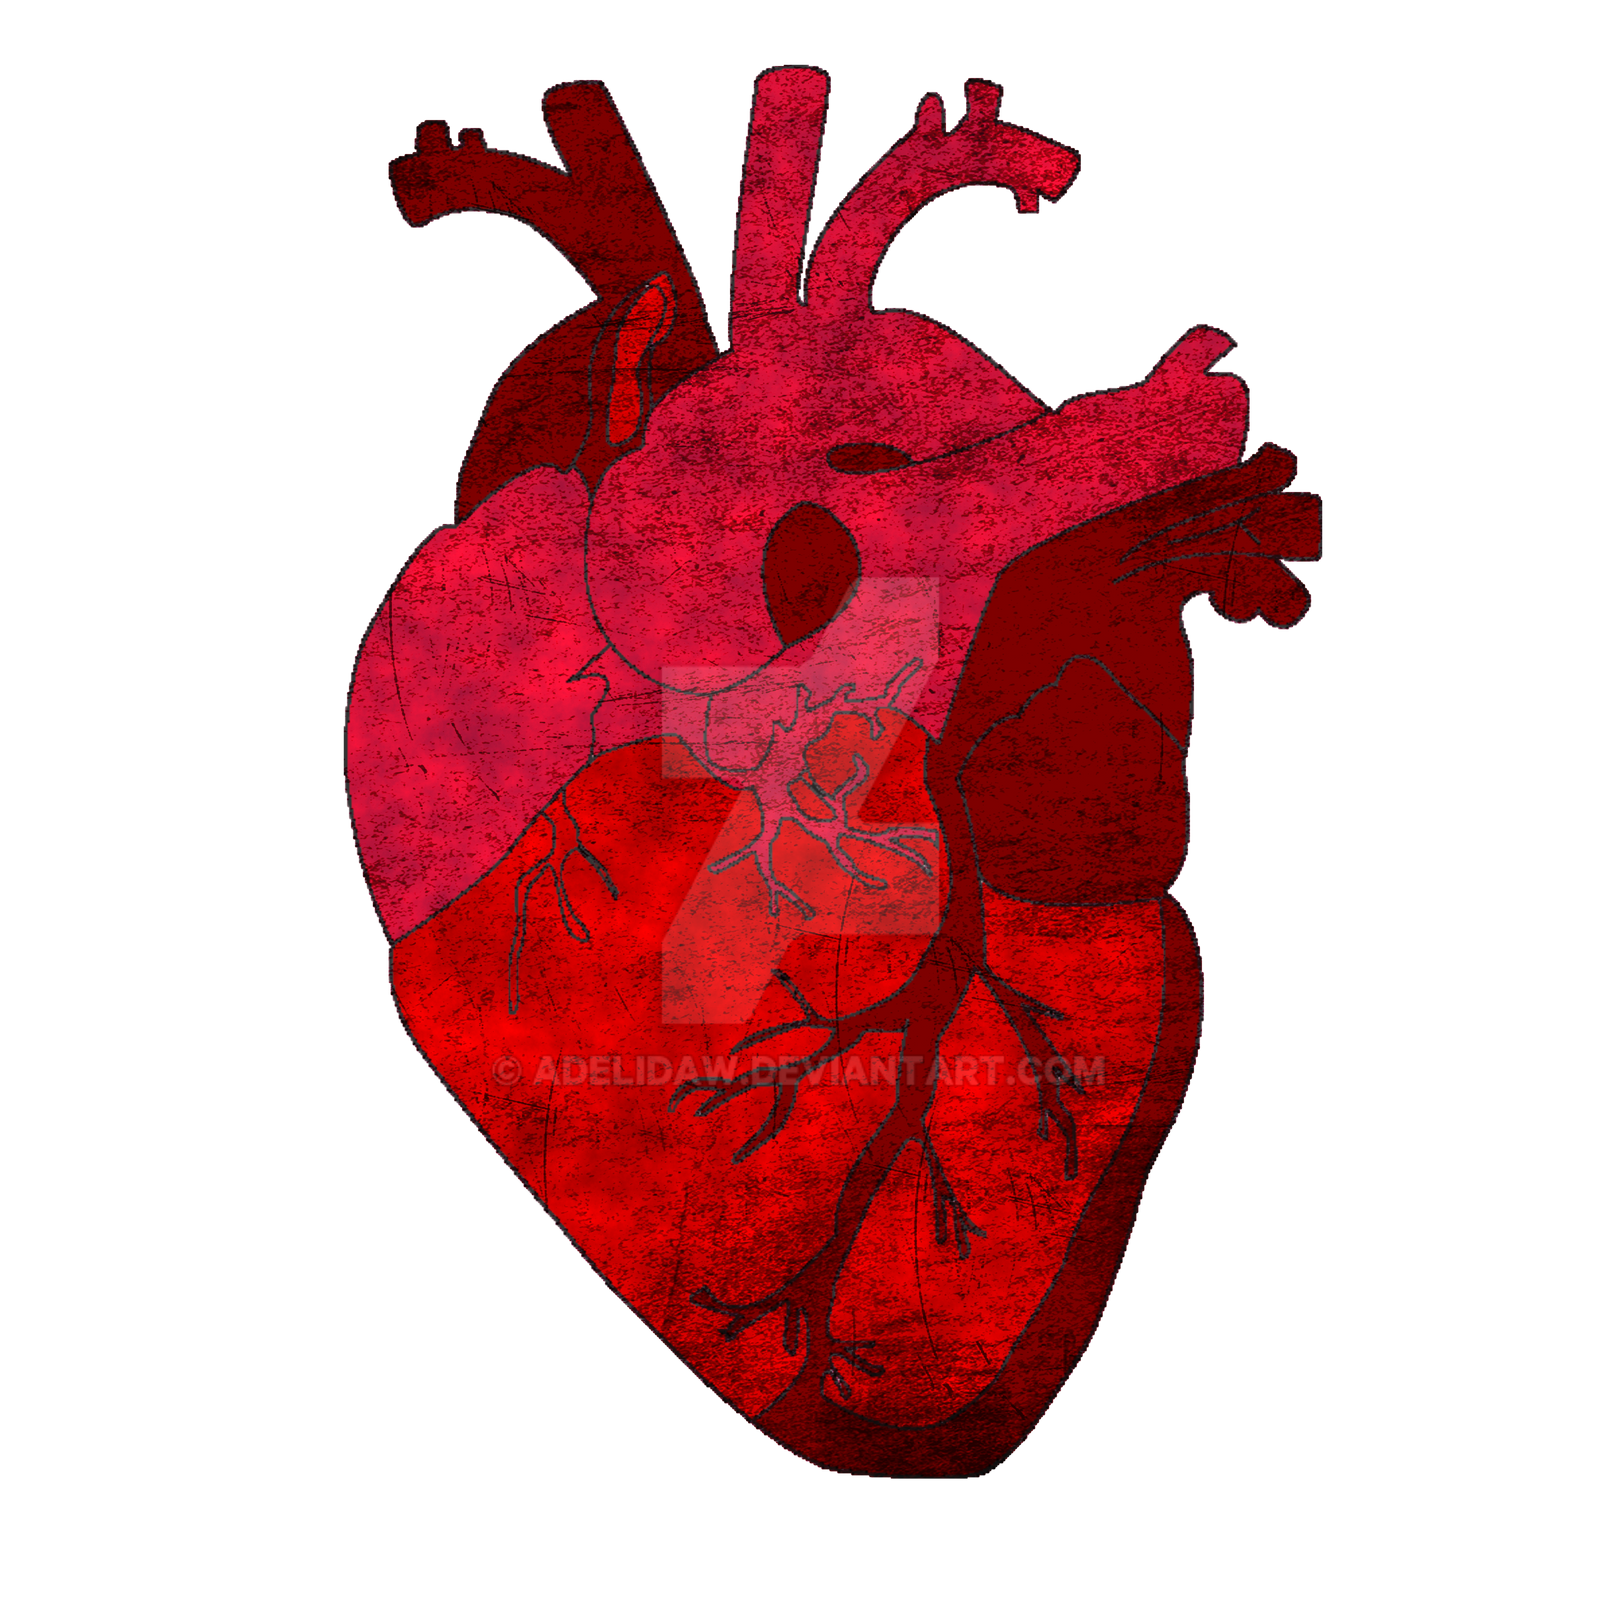 Human Heart. by Adelidaw on DeviantArt